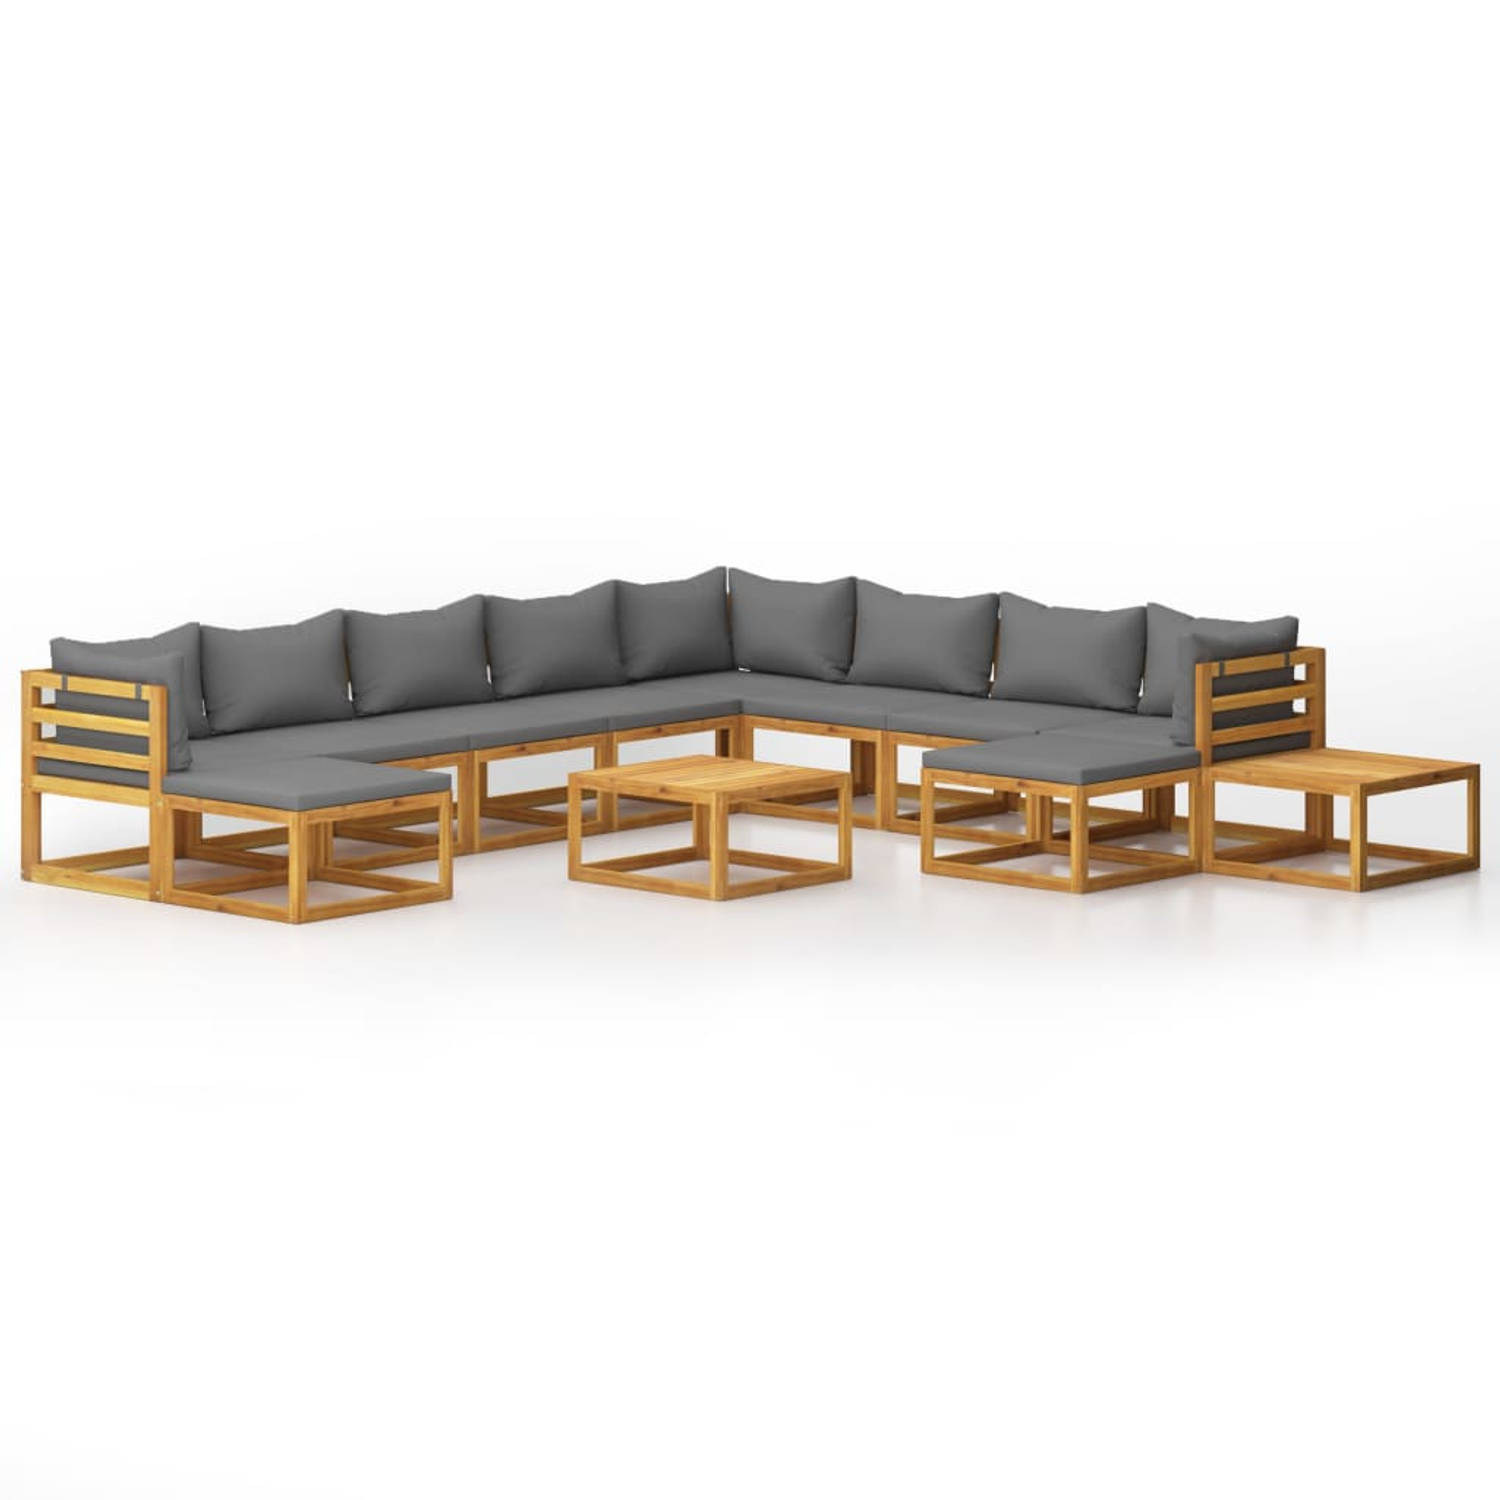 The Living Store 12-delige Loungeset met kussens massief acaciahout - Tuinset